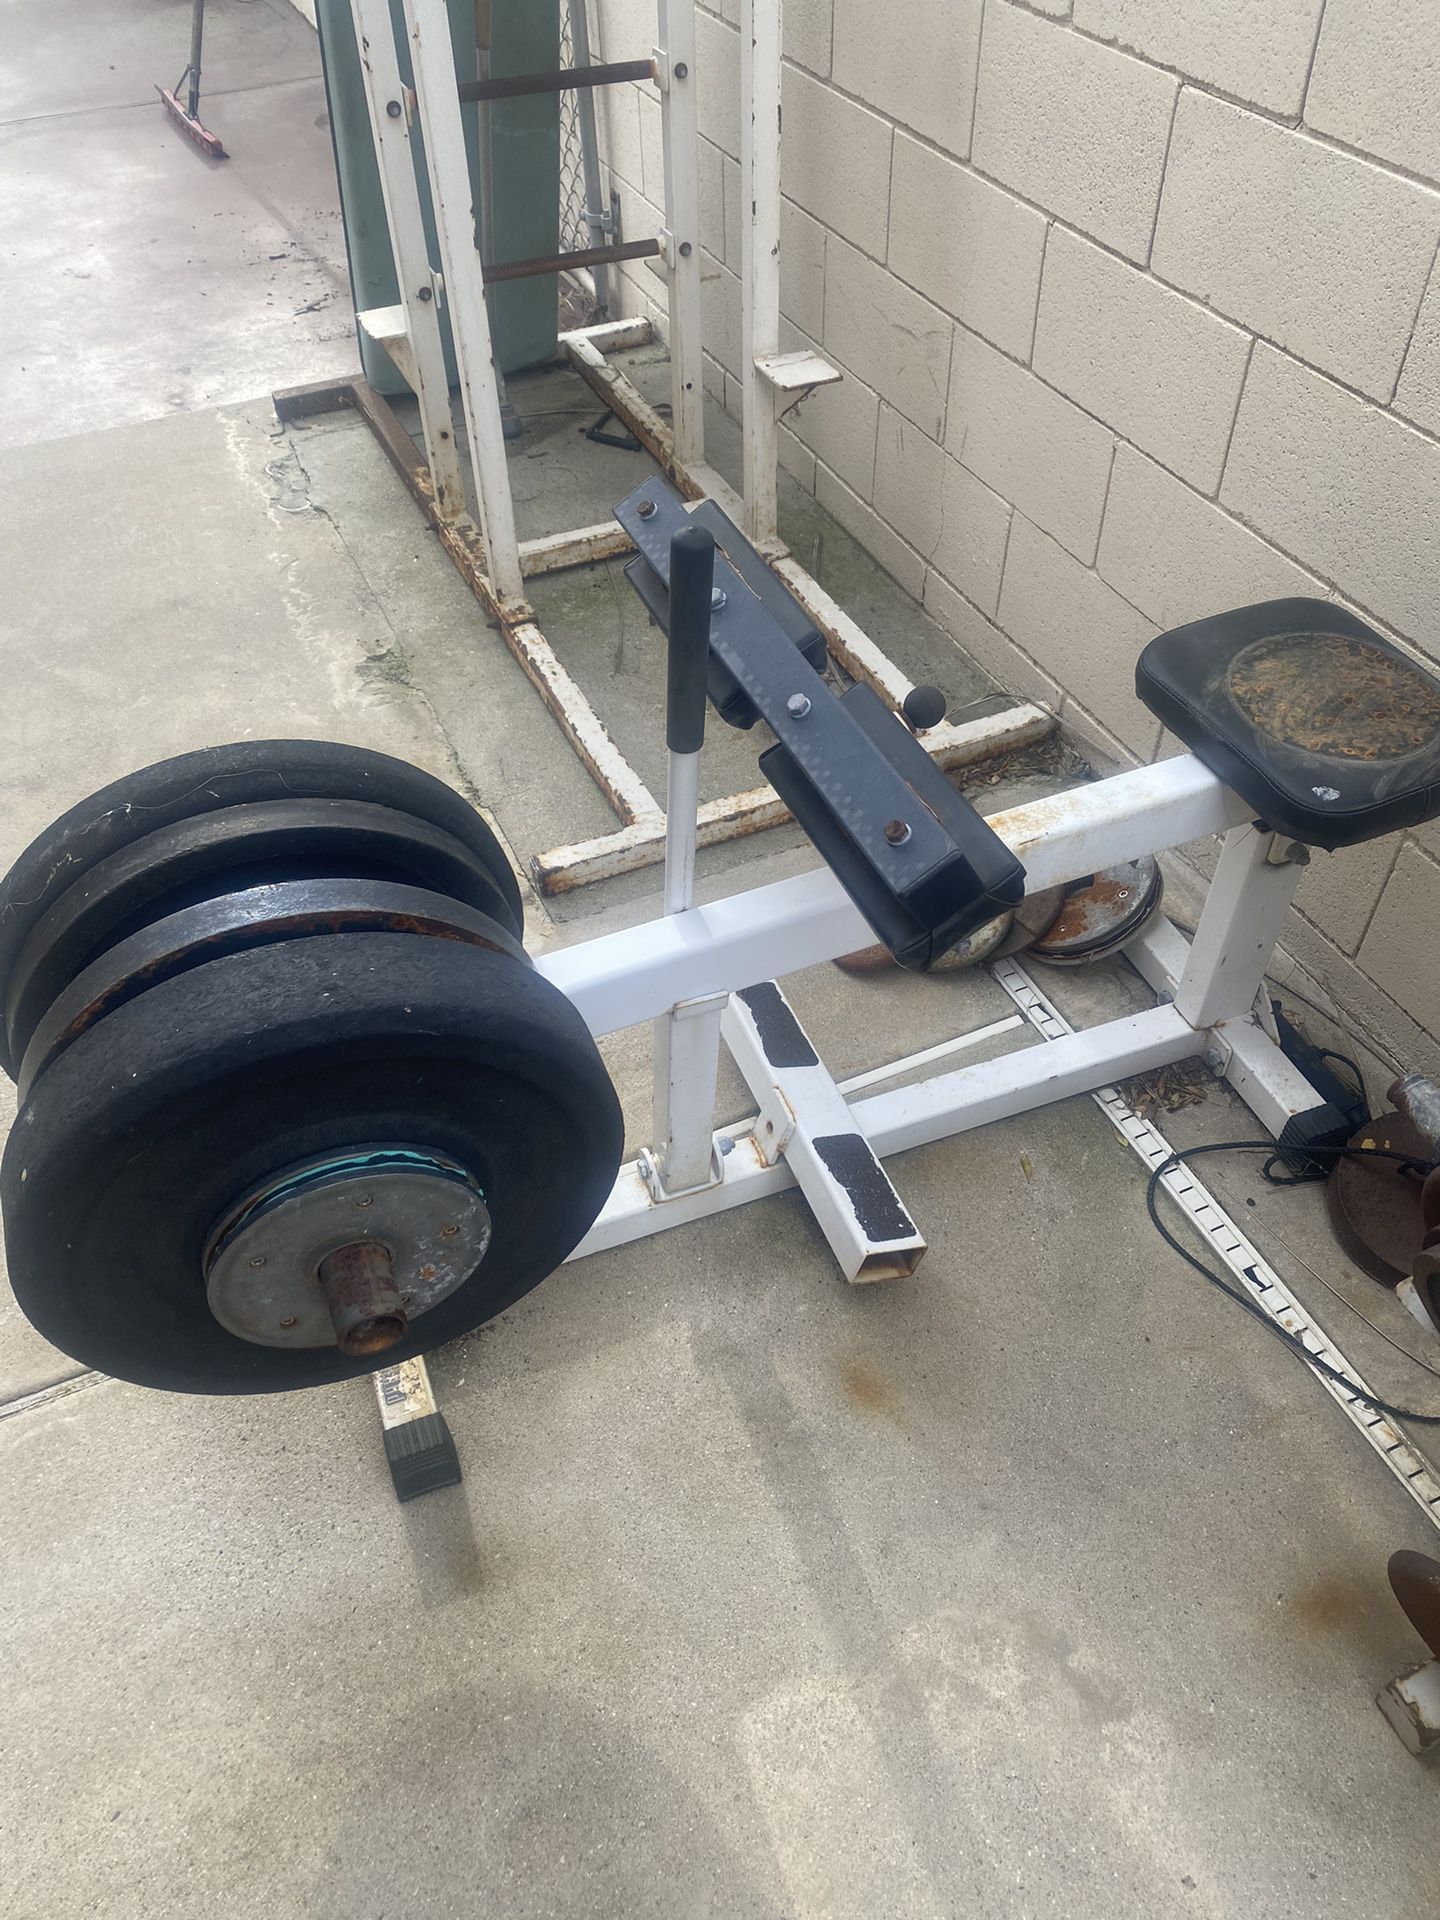 Calf Press Machine And 160 Lbs Of Weights